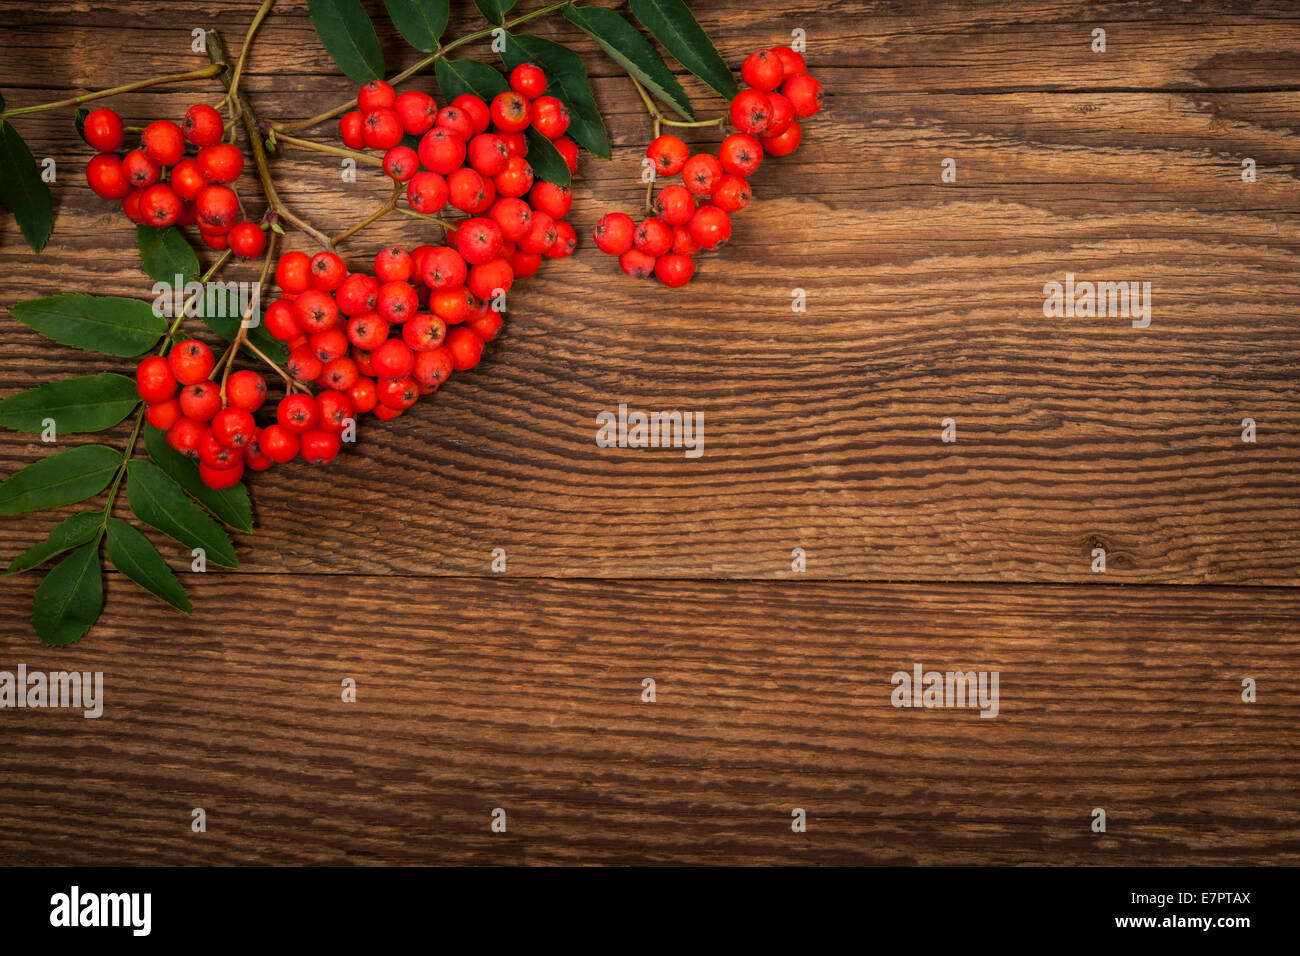 Red mountain ash or rowan berries on rustic wooden background Stock Photo